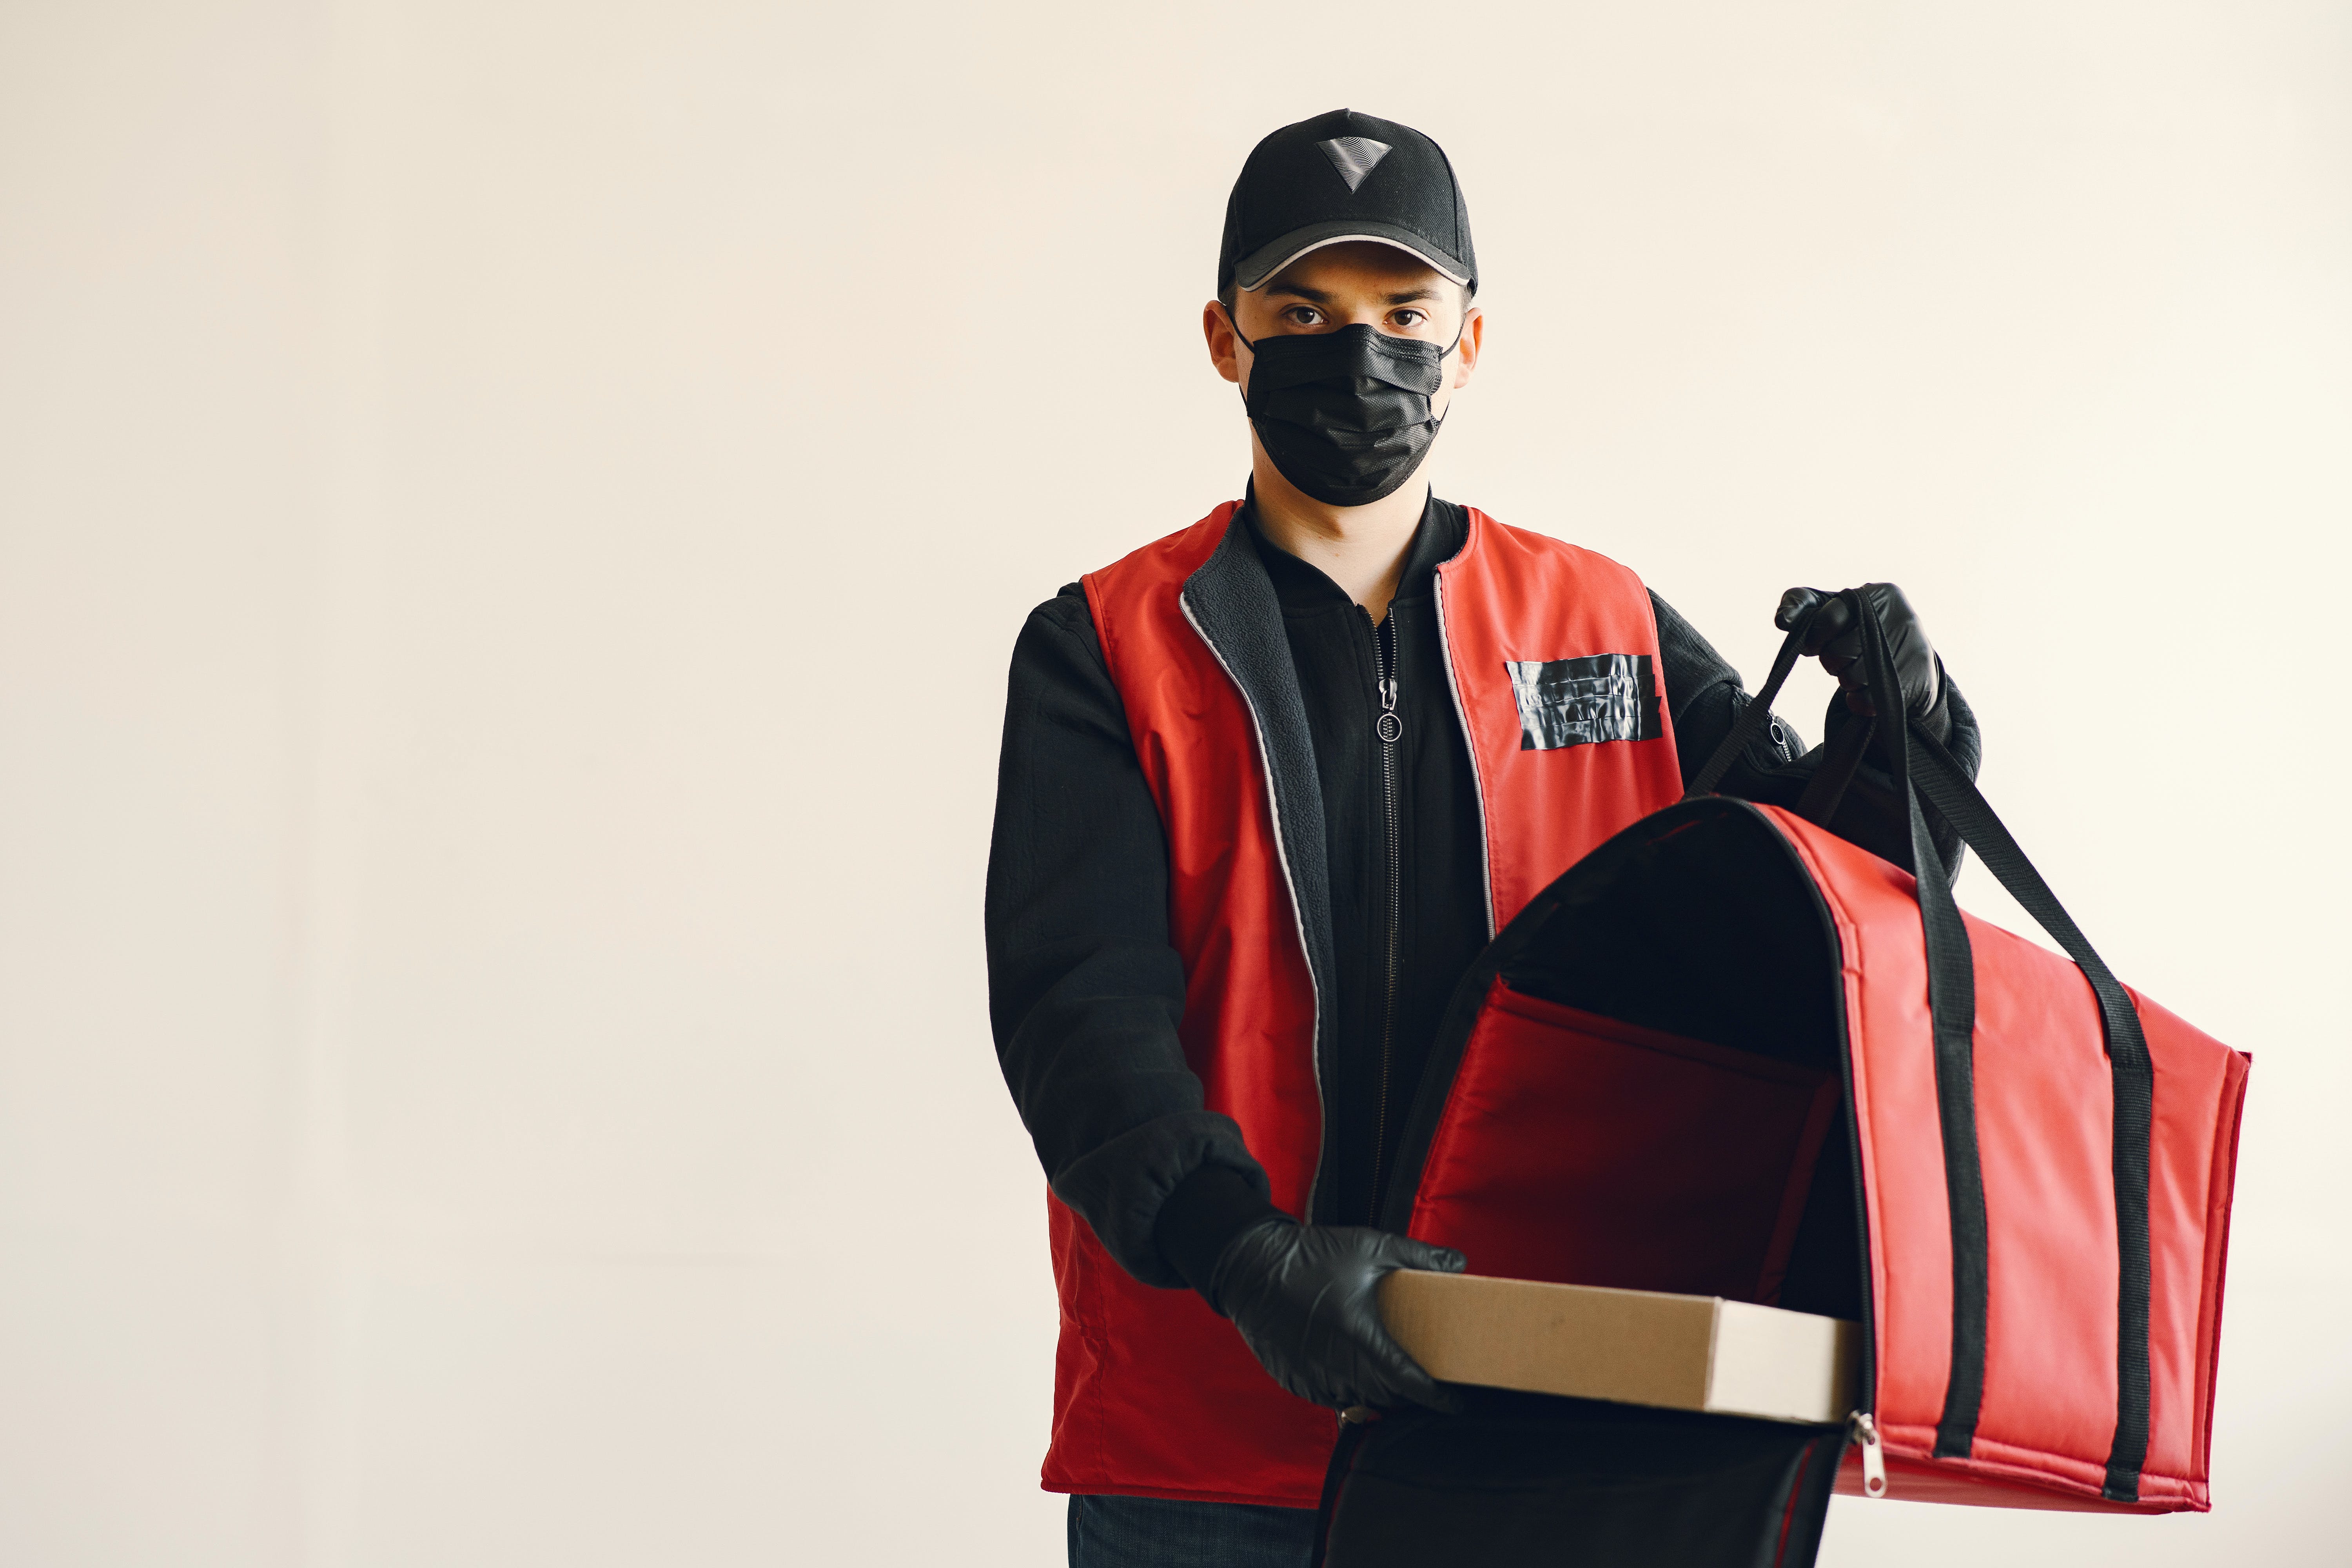 A pizza delivery guy. | Source: Pexels